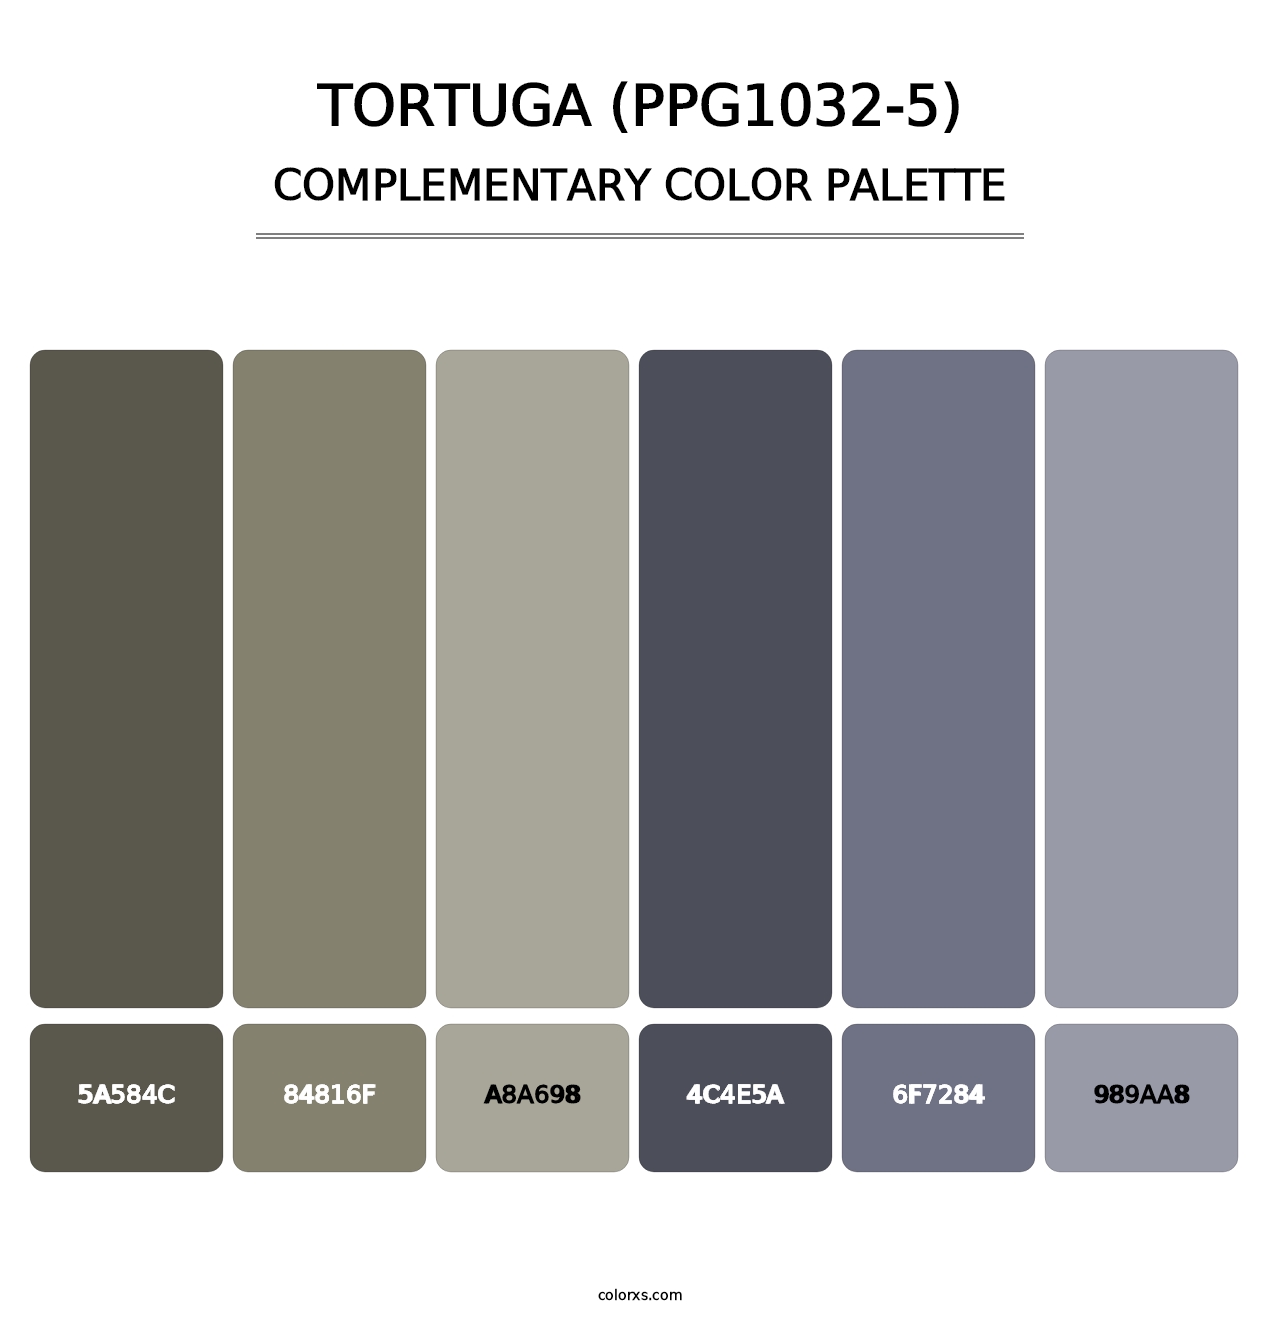 Tortuga (PPG1032-5) - Complementary Color Palette